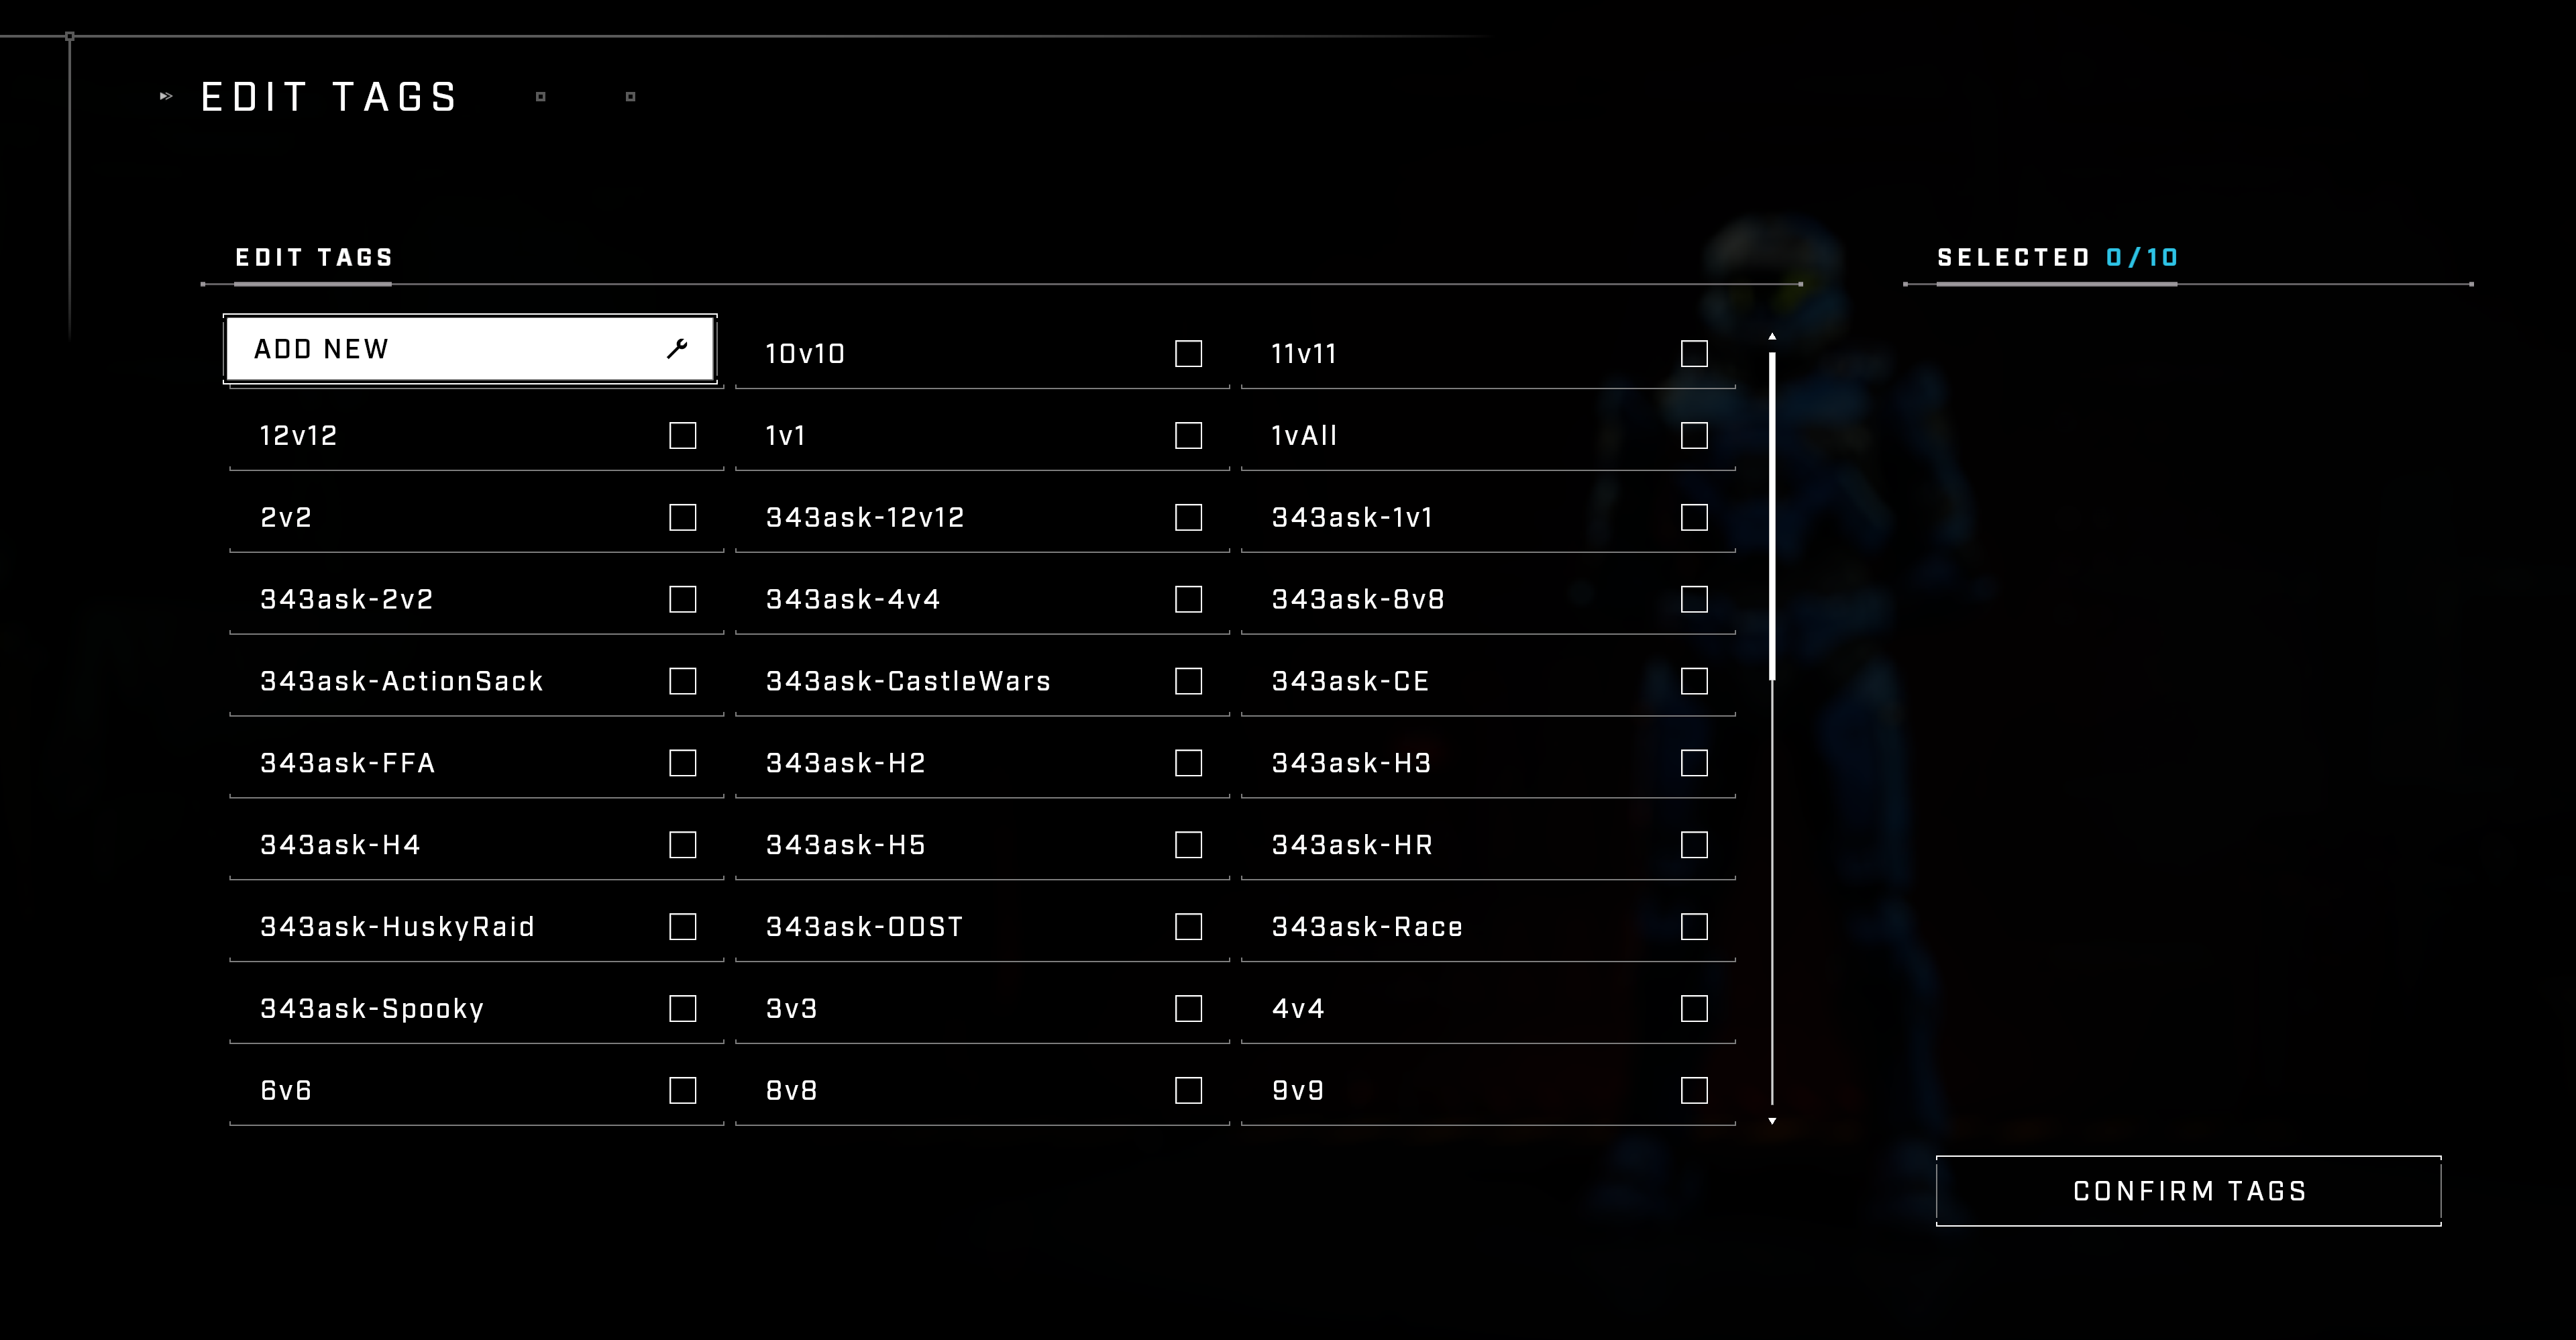 Image showing the list of tags for Halo Infinite matchmaking consideration. These include:

343ask-1v1
343ask-2v2
343ask-4v4
343ask-8v8
343ask-12v12
343ask-FFA
343ask-ActionSack
343ask-CastleWars
343ask-HuskyRaid
343ask-Spooky
343ask-Race
343ask-CE
343ask-H2
343ask-H3
343ask-ODST
343ask-HR
343ask-H4
343ask-H5